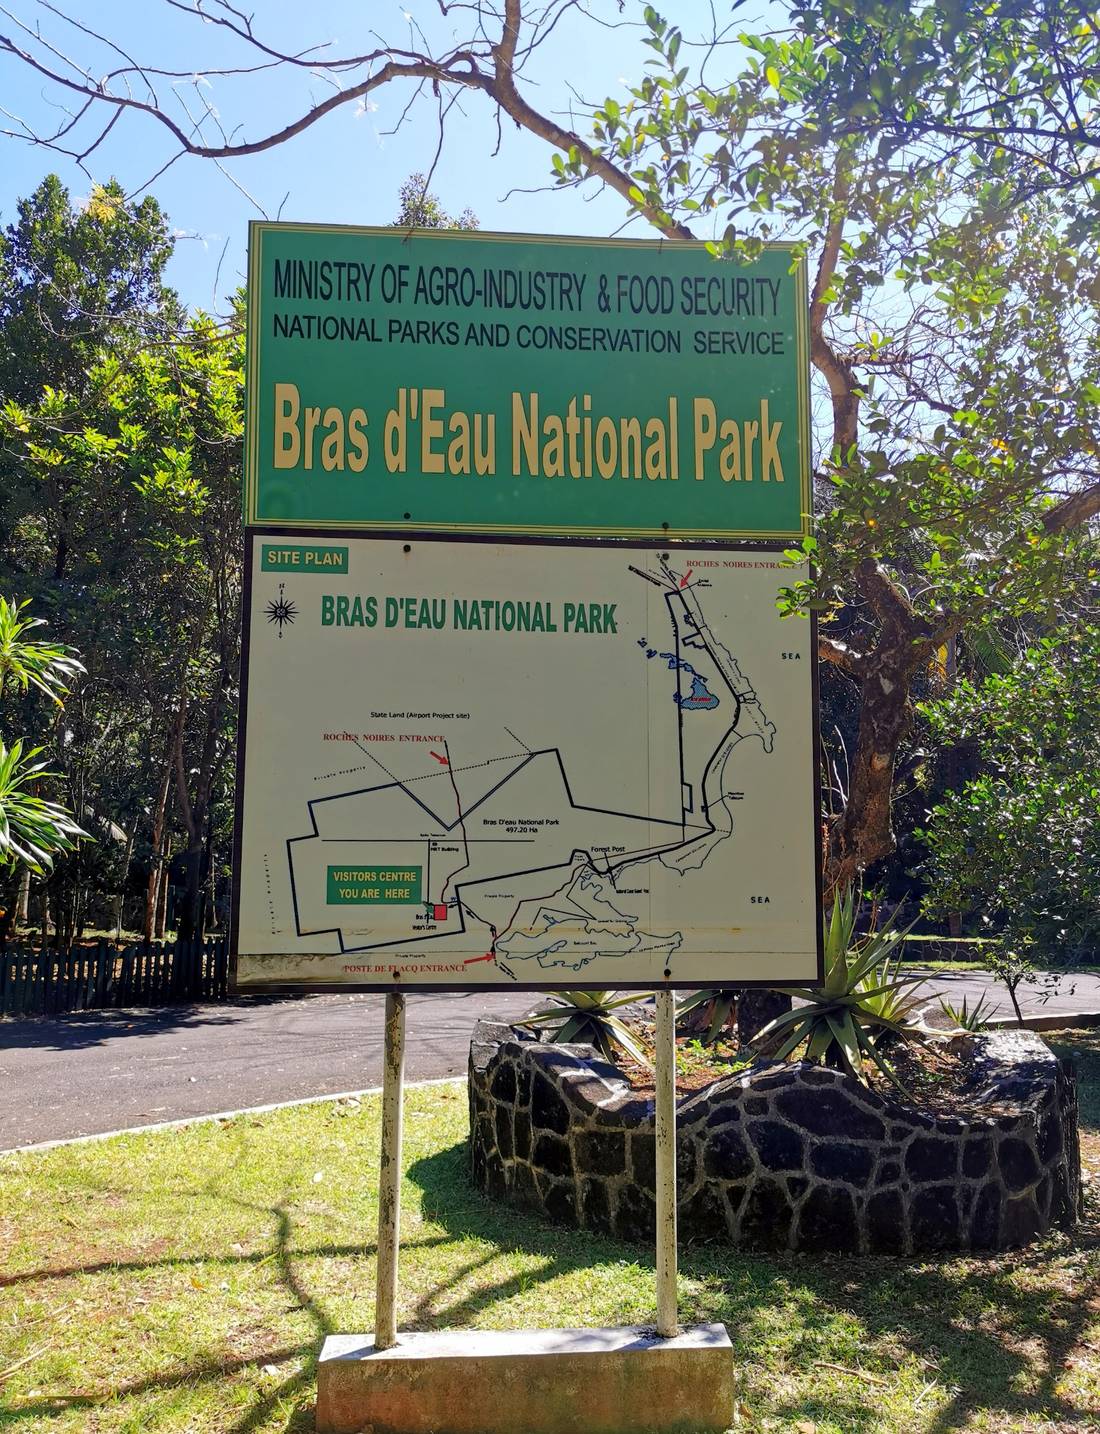 You can find a map of the park at the entrance itself.